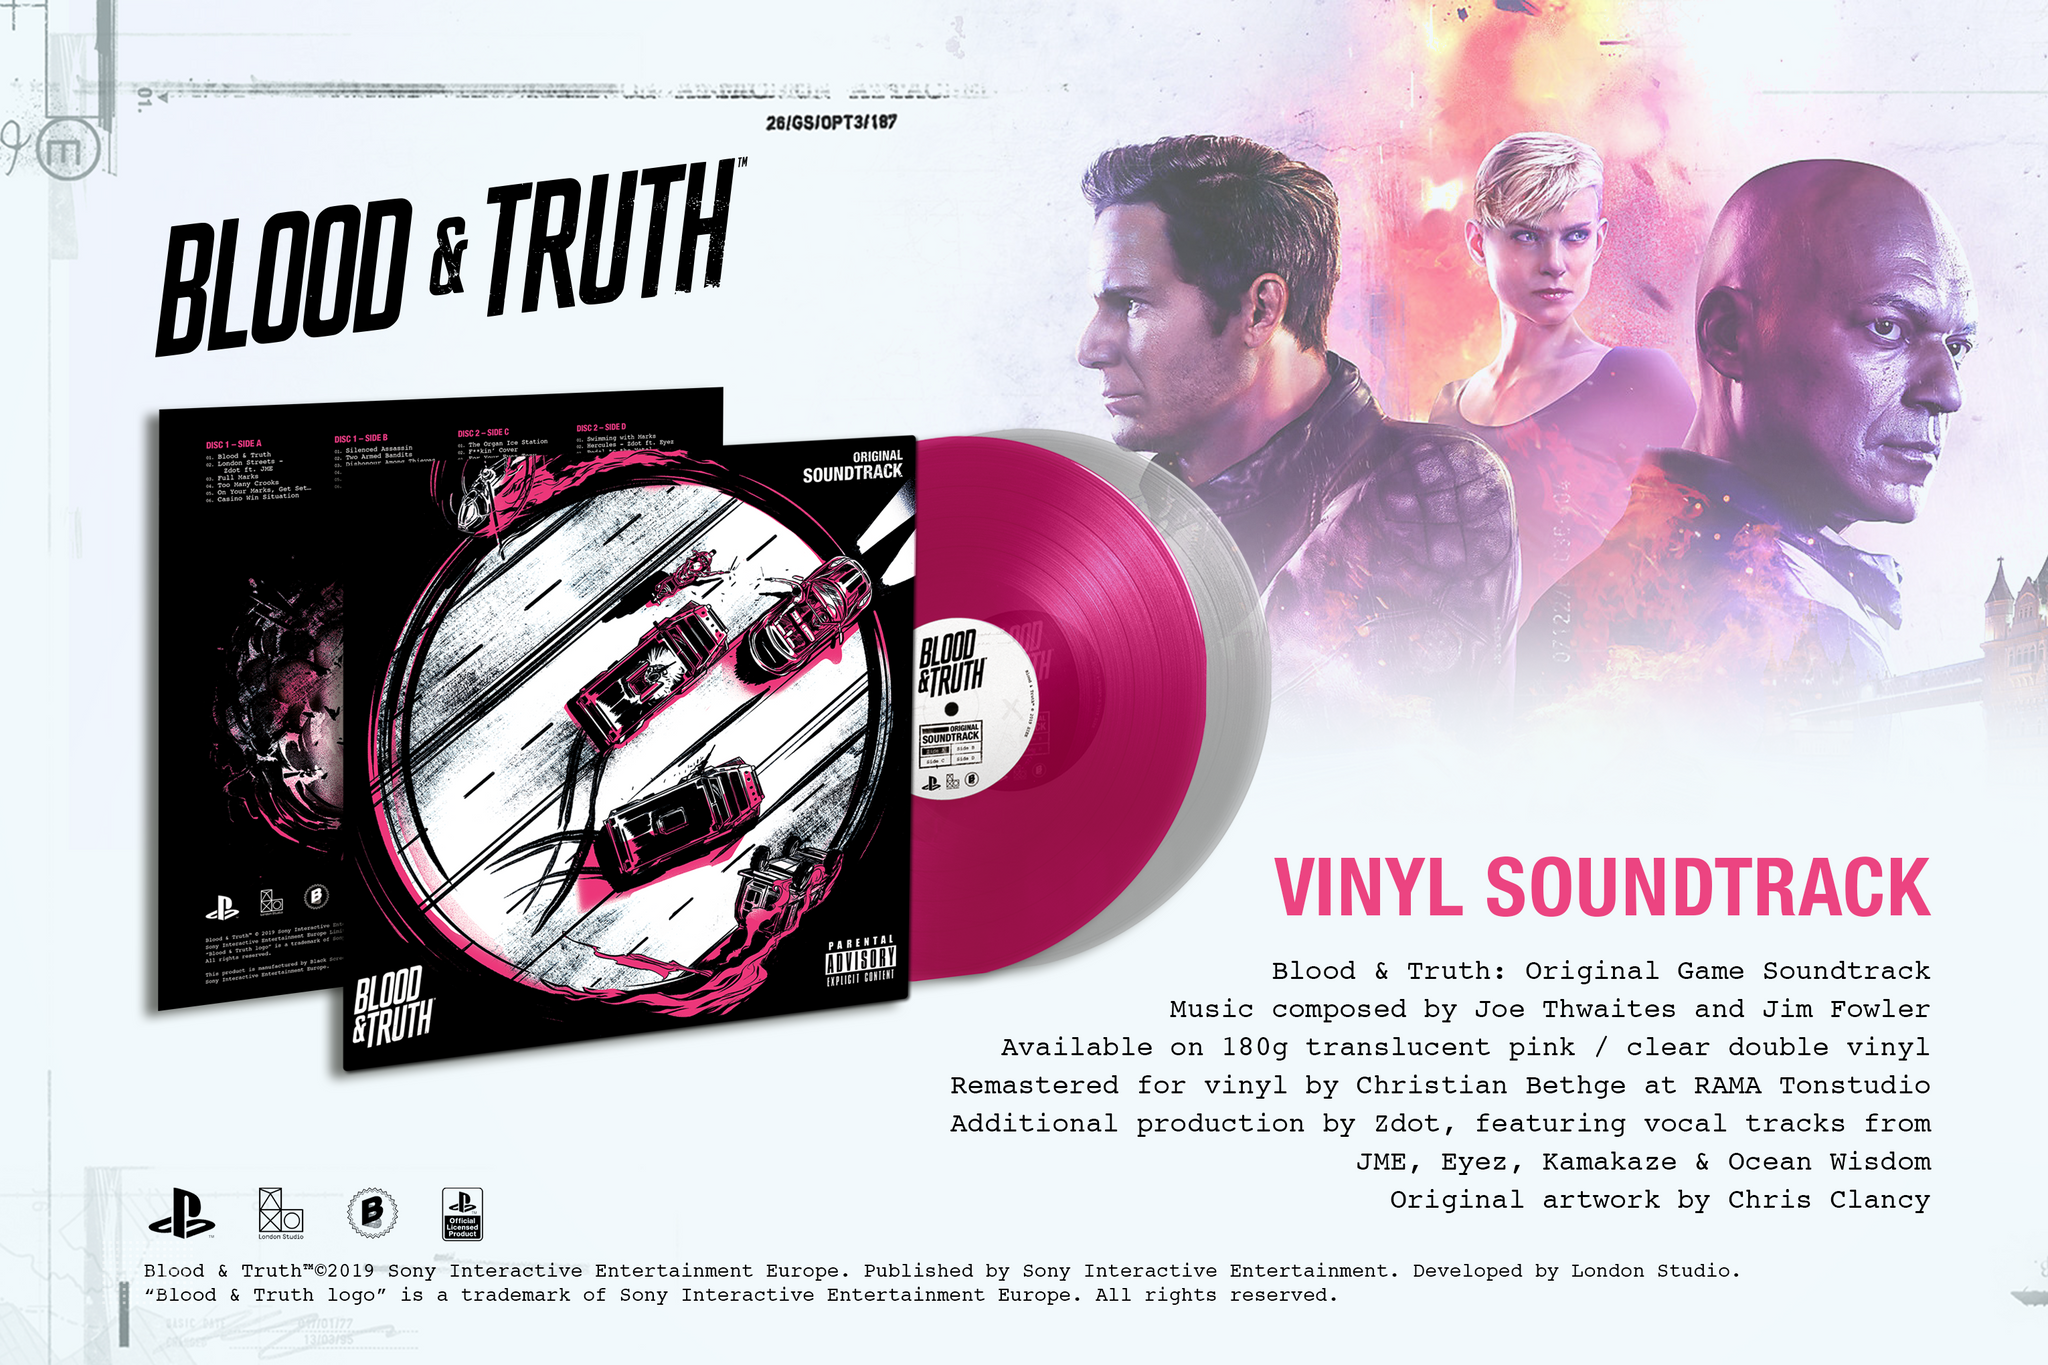 blood & truth banner with artwork and information about the vinyl records. Information can be found in the product description.